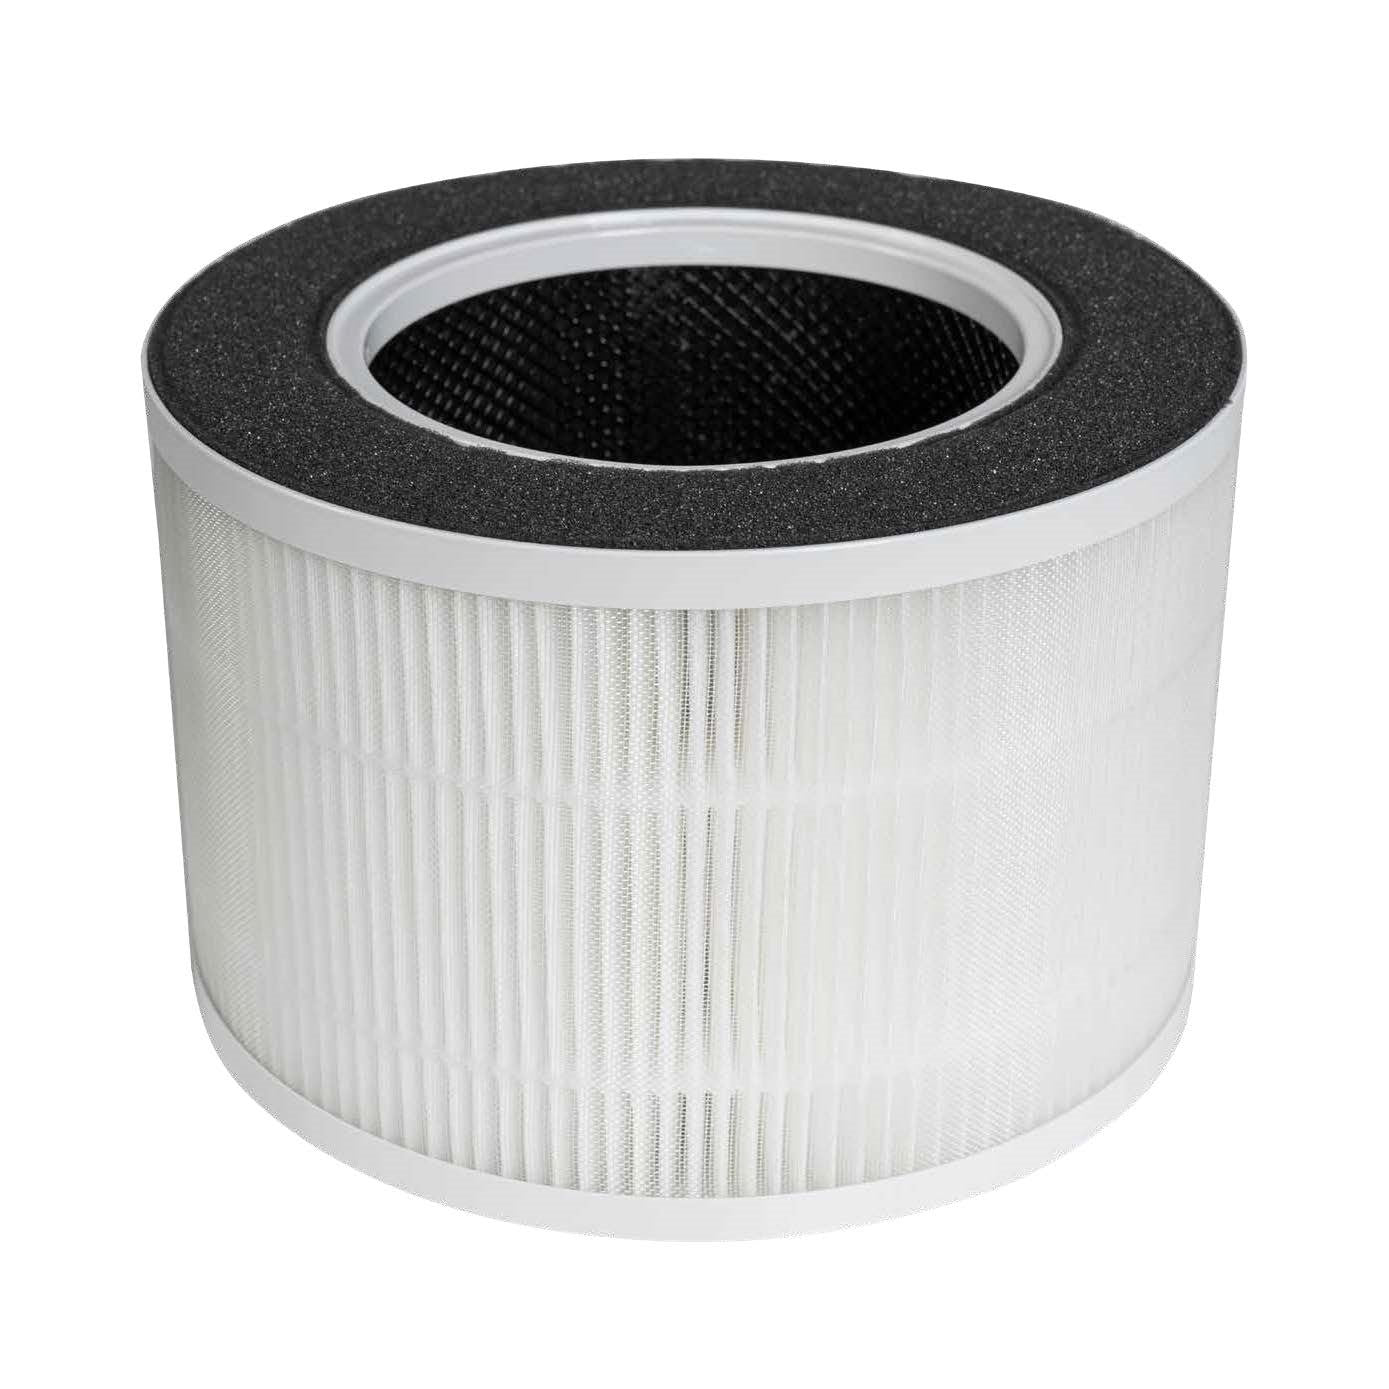 Image of the Devola replacement HEPA filter for air purifiers on a white background